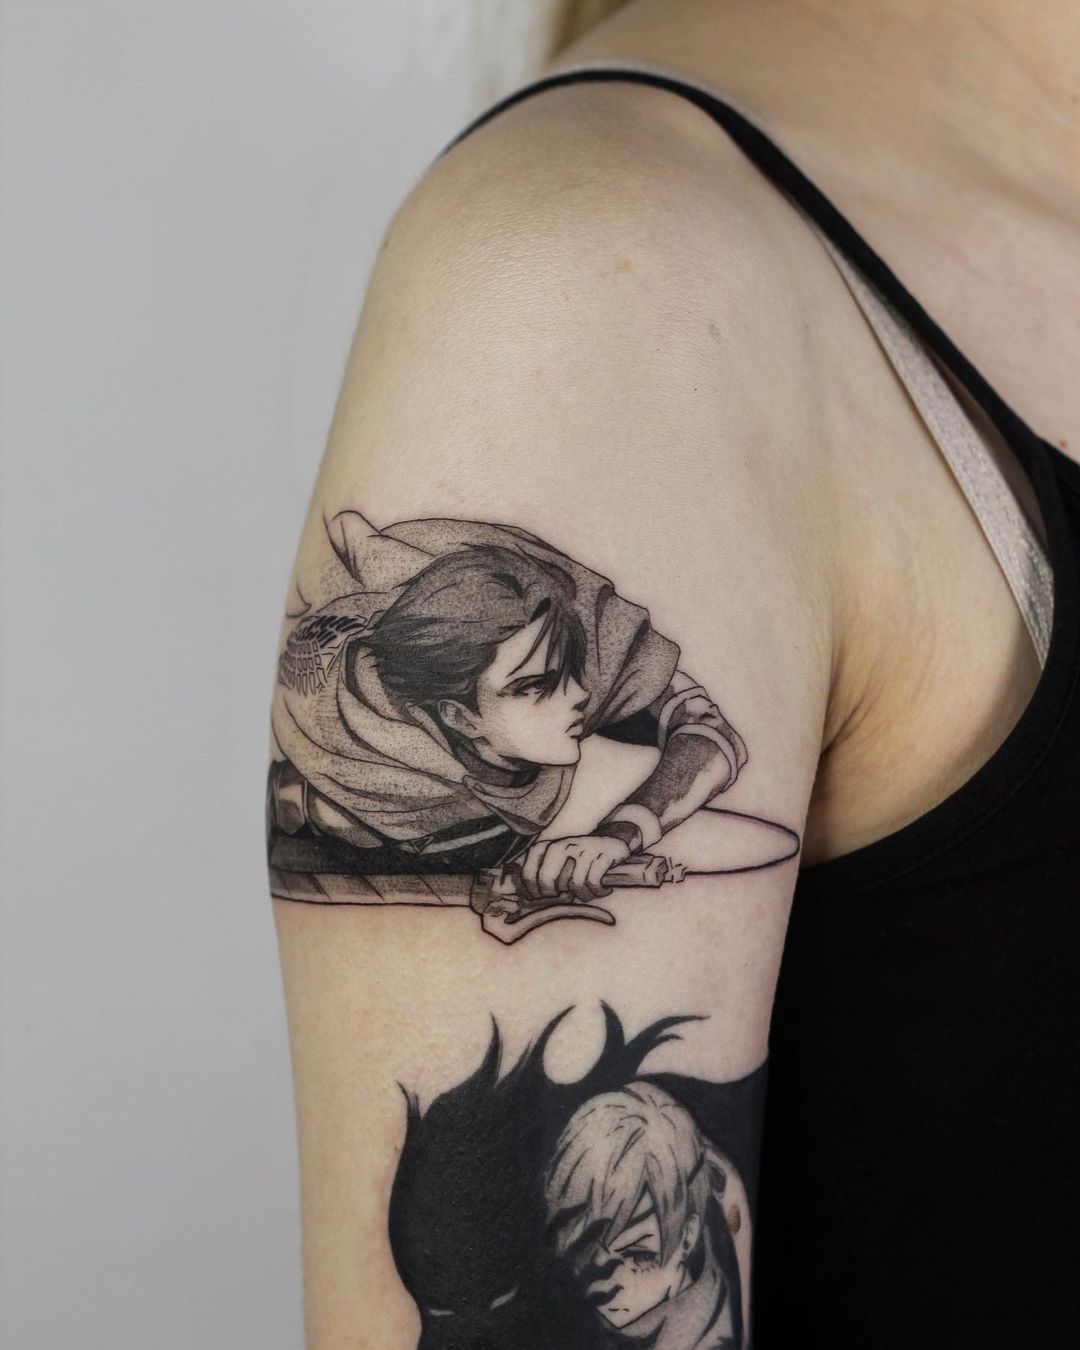 Attack on Titan Tattoos: A Tribute to the Titans and Humanity